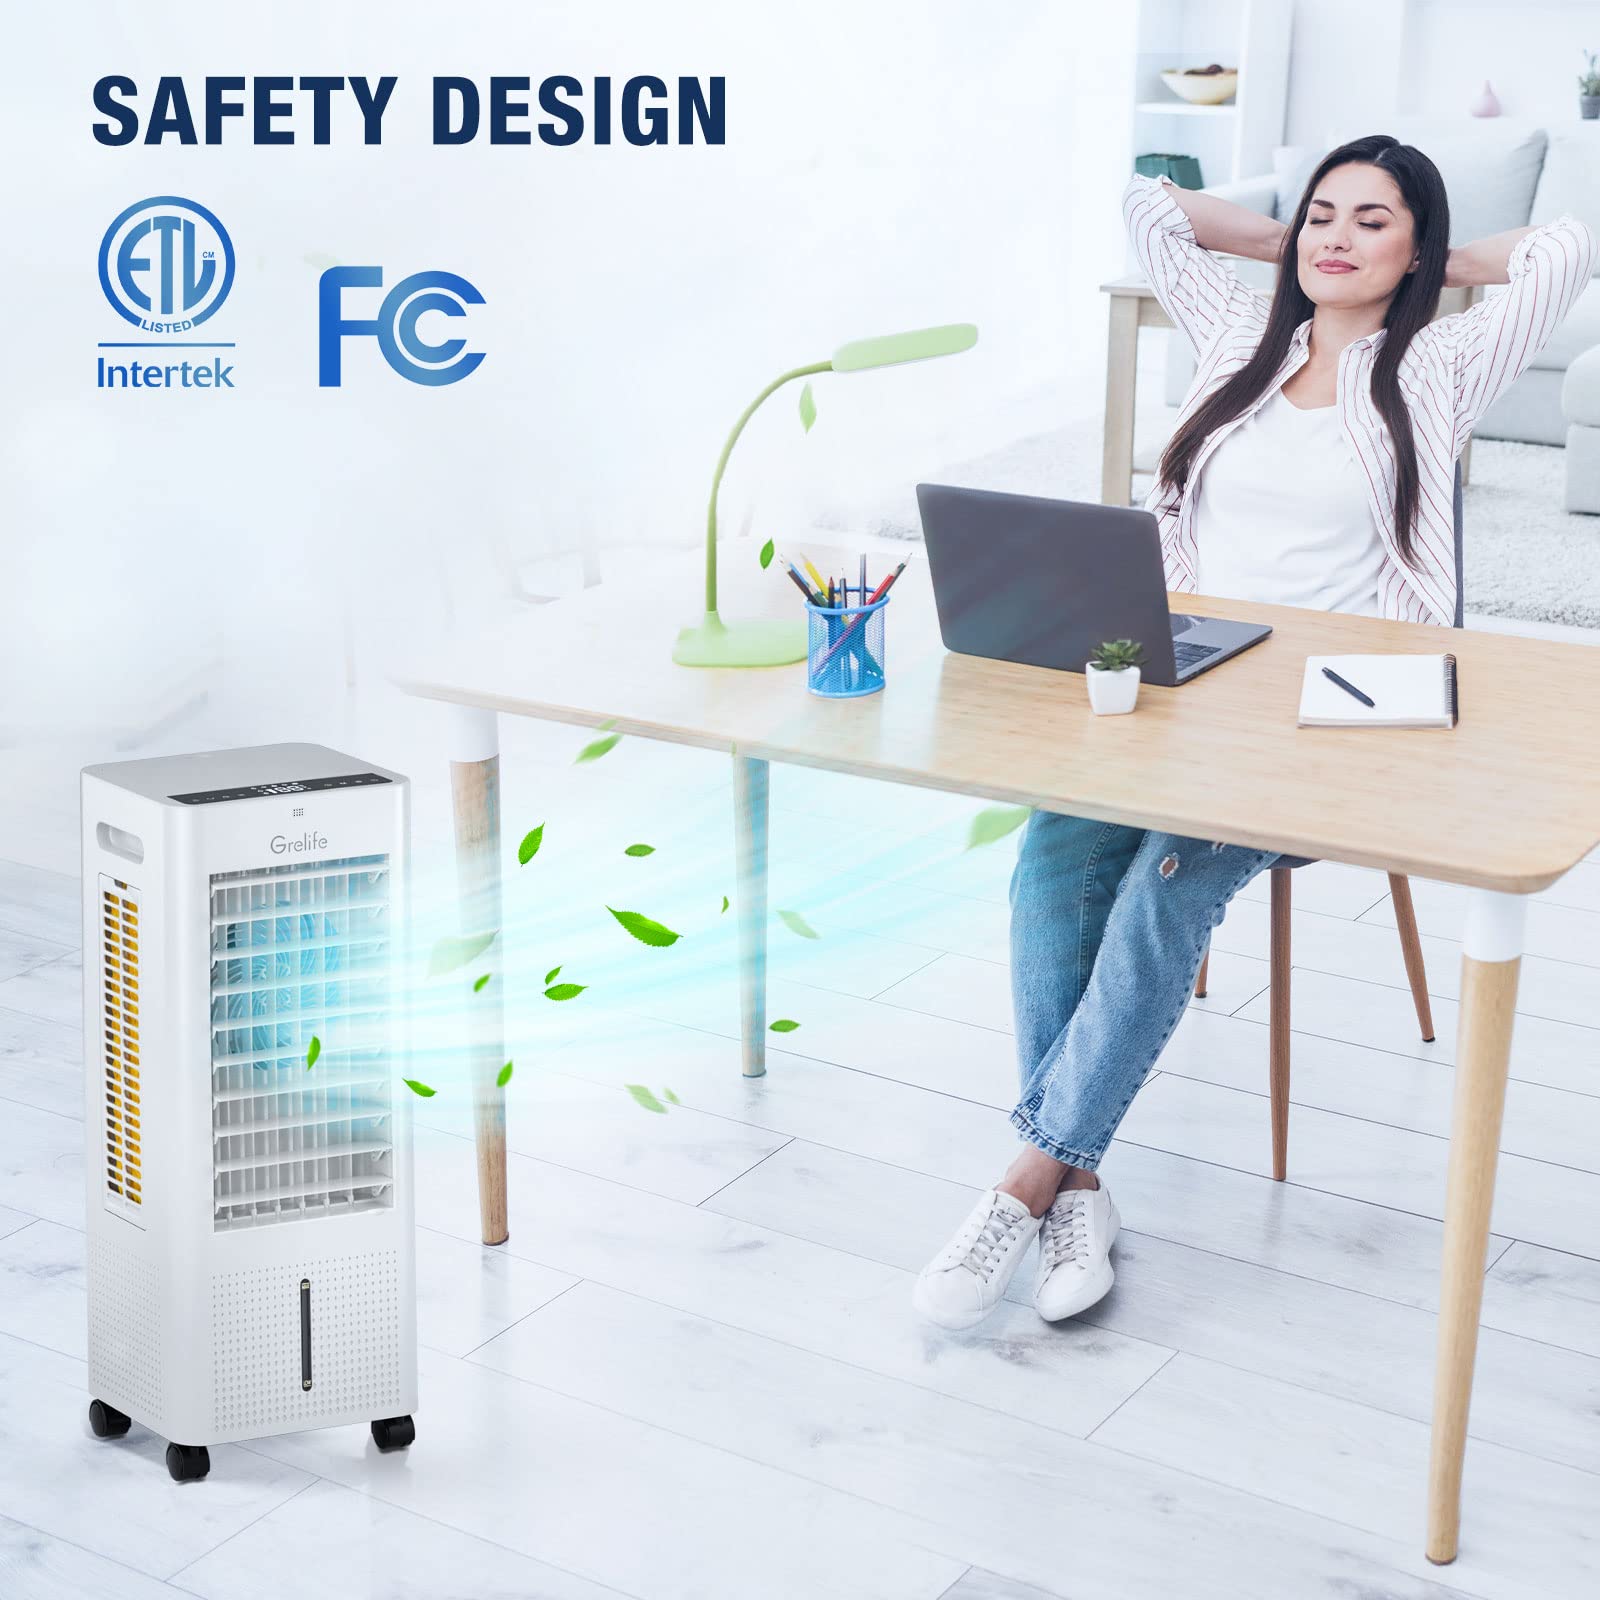 Grelife Evaporative Air Cooler, Portable Cooling Fan with 75° Oscillating, Humidifying, 1.58Gal Water Tank, 4 Ice Packs, Remote Control, 3 Speeds, 12H Timer, Personal Swamp Cooler for Room Home Office